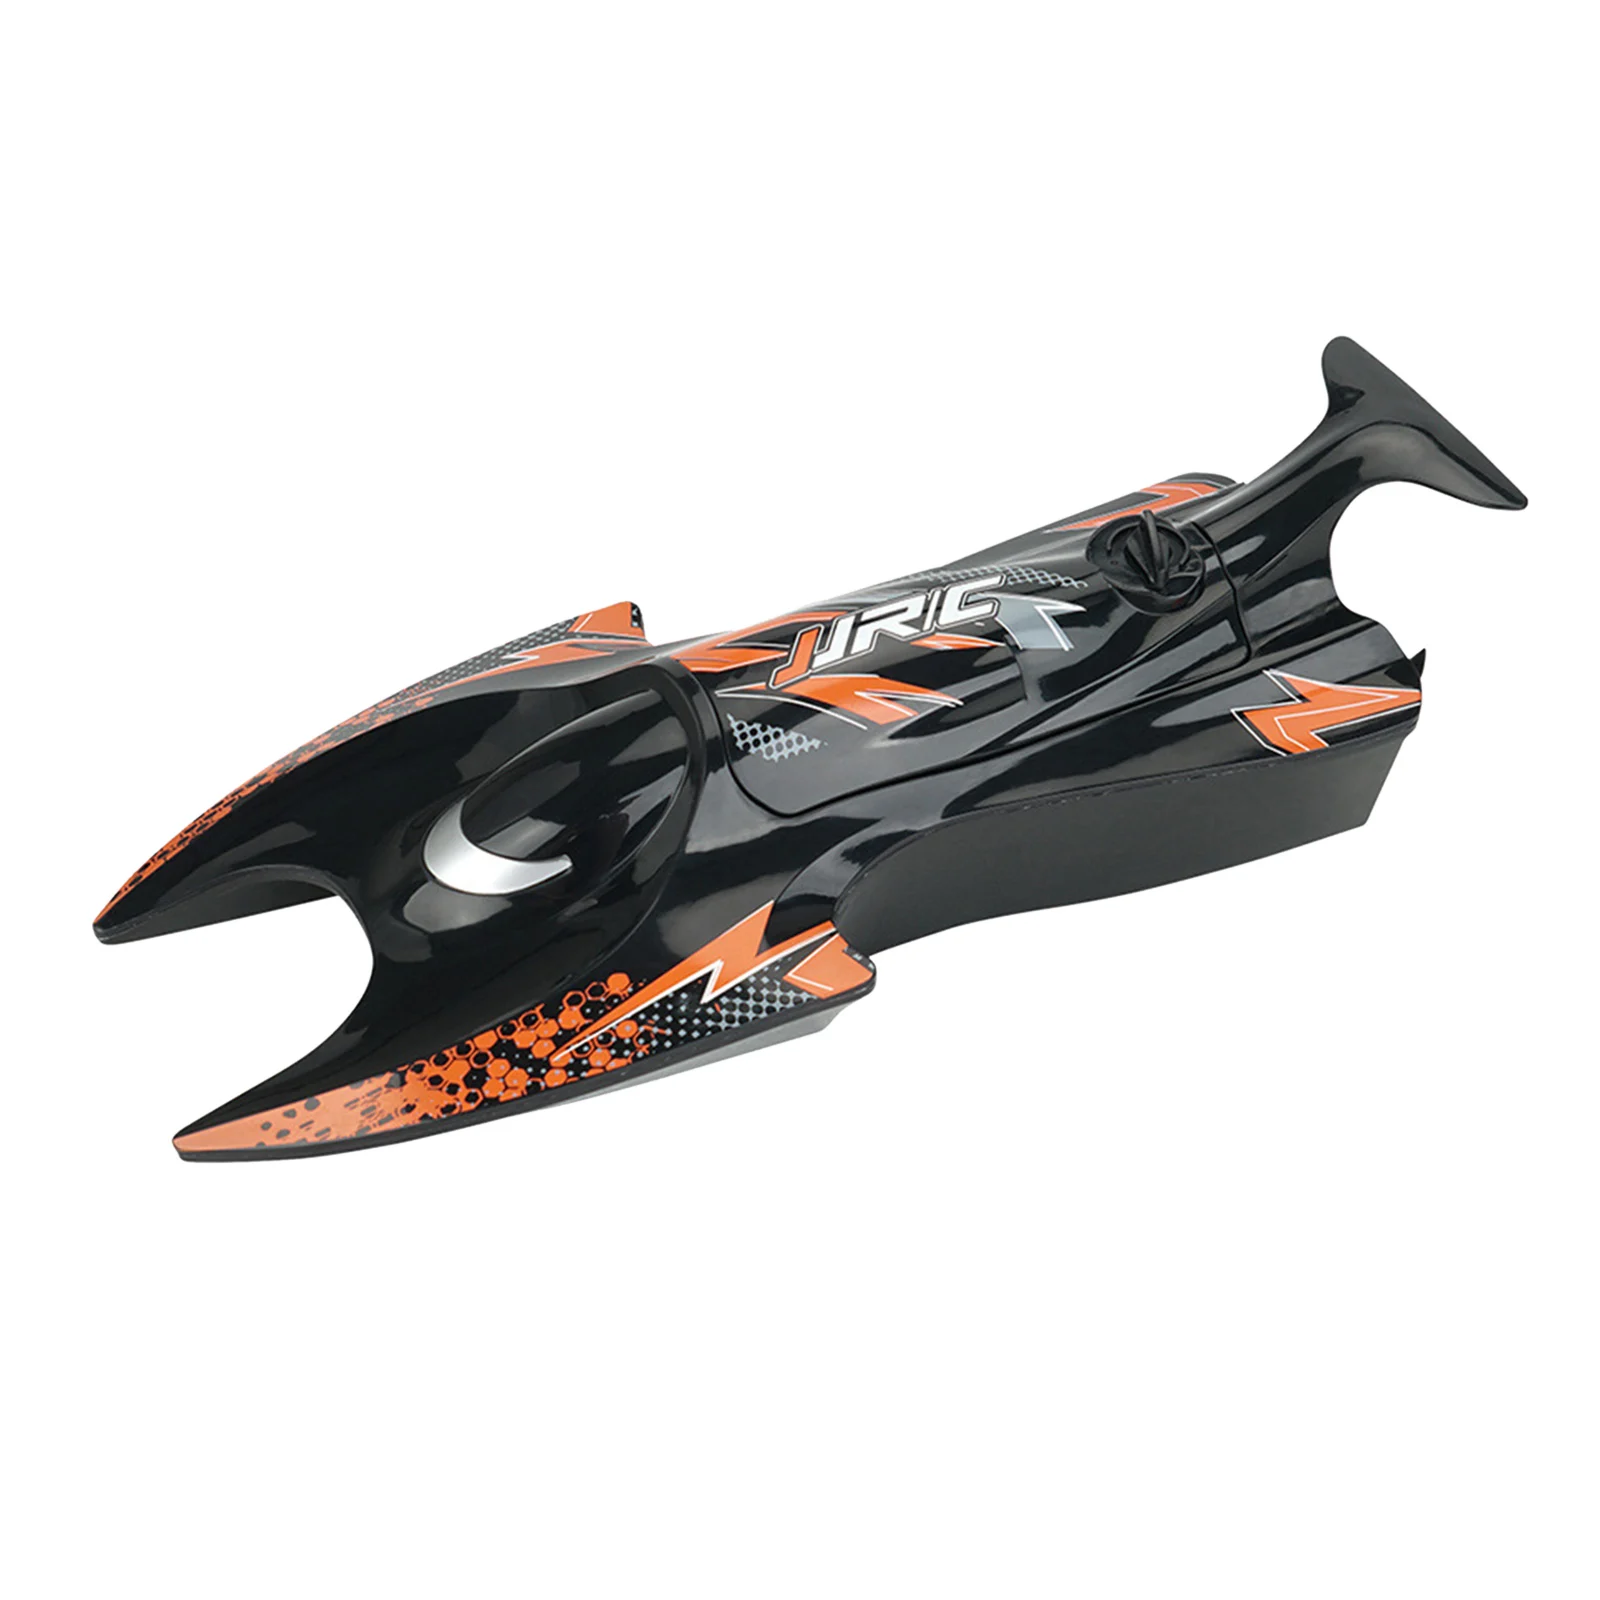  Boat Toy Lobster Shaped Dual Motors High  Lobster Long-Lasting  Boat Electric for Lake Swimming 